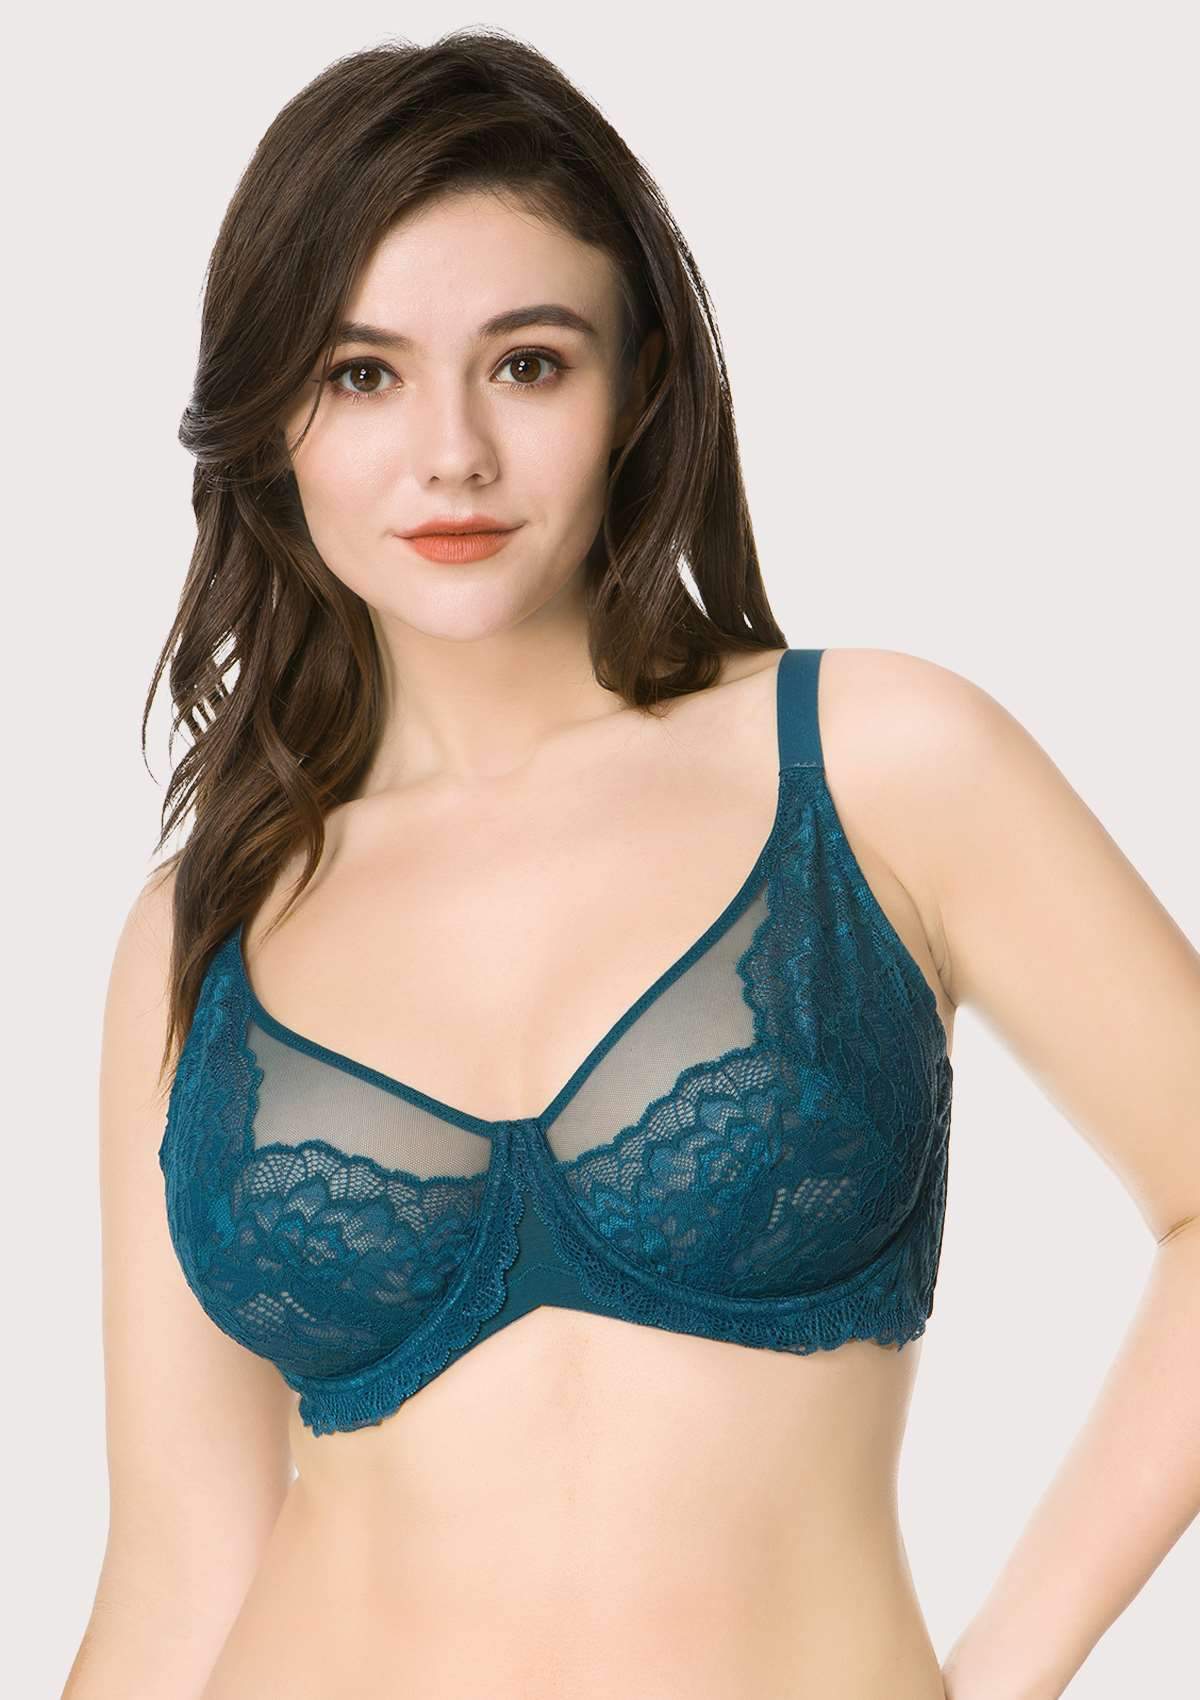 HSIA Peony Lace Unlined Supportive Underwire Bra - Dark Blue / 38 / D